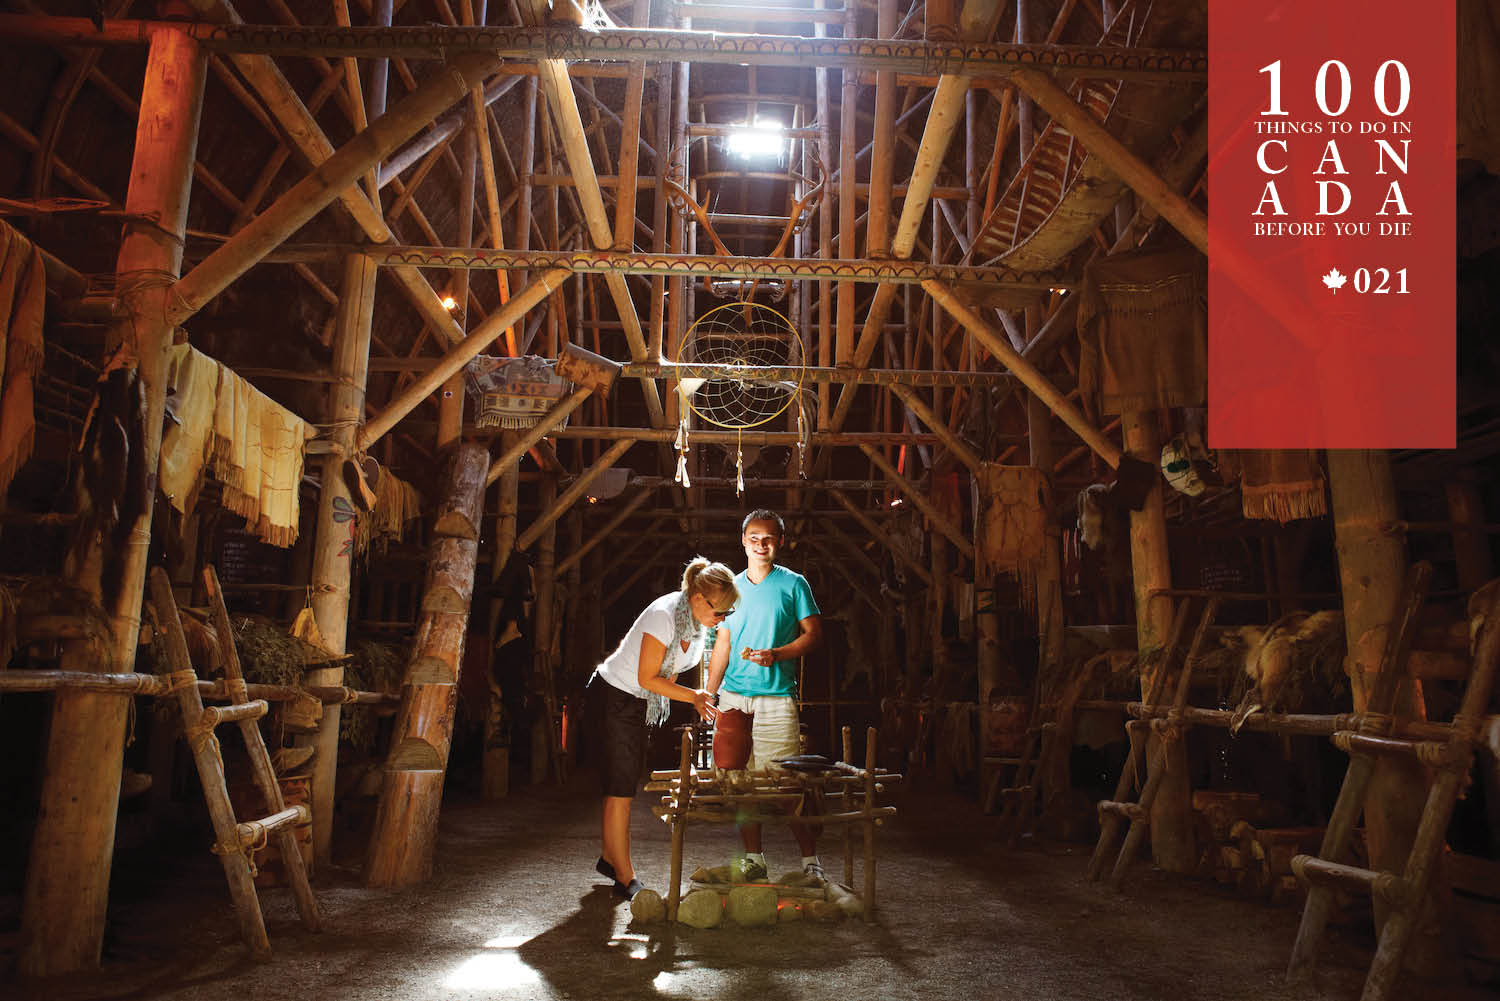 Spend a storied evening in a First Nations longhouse